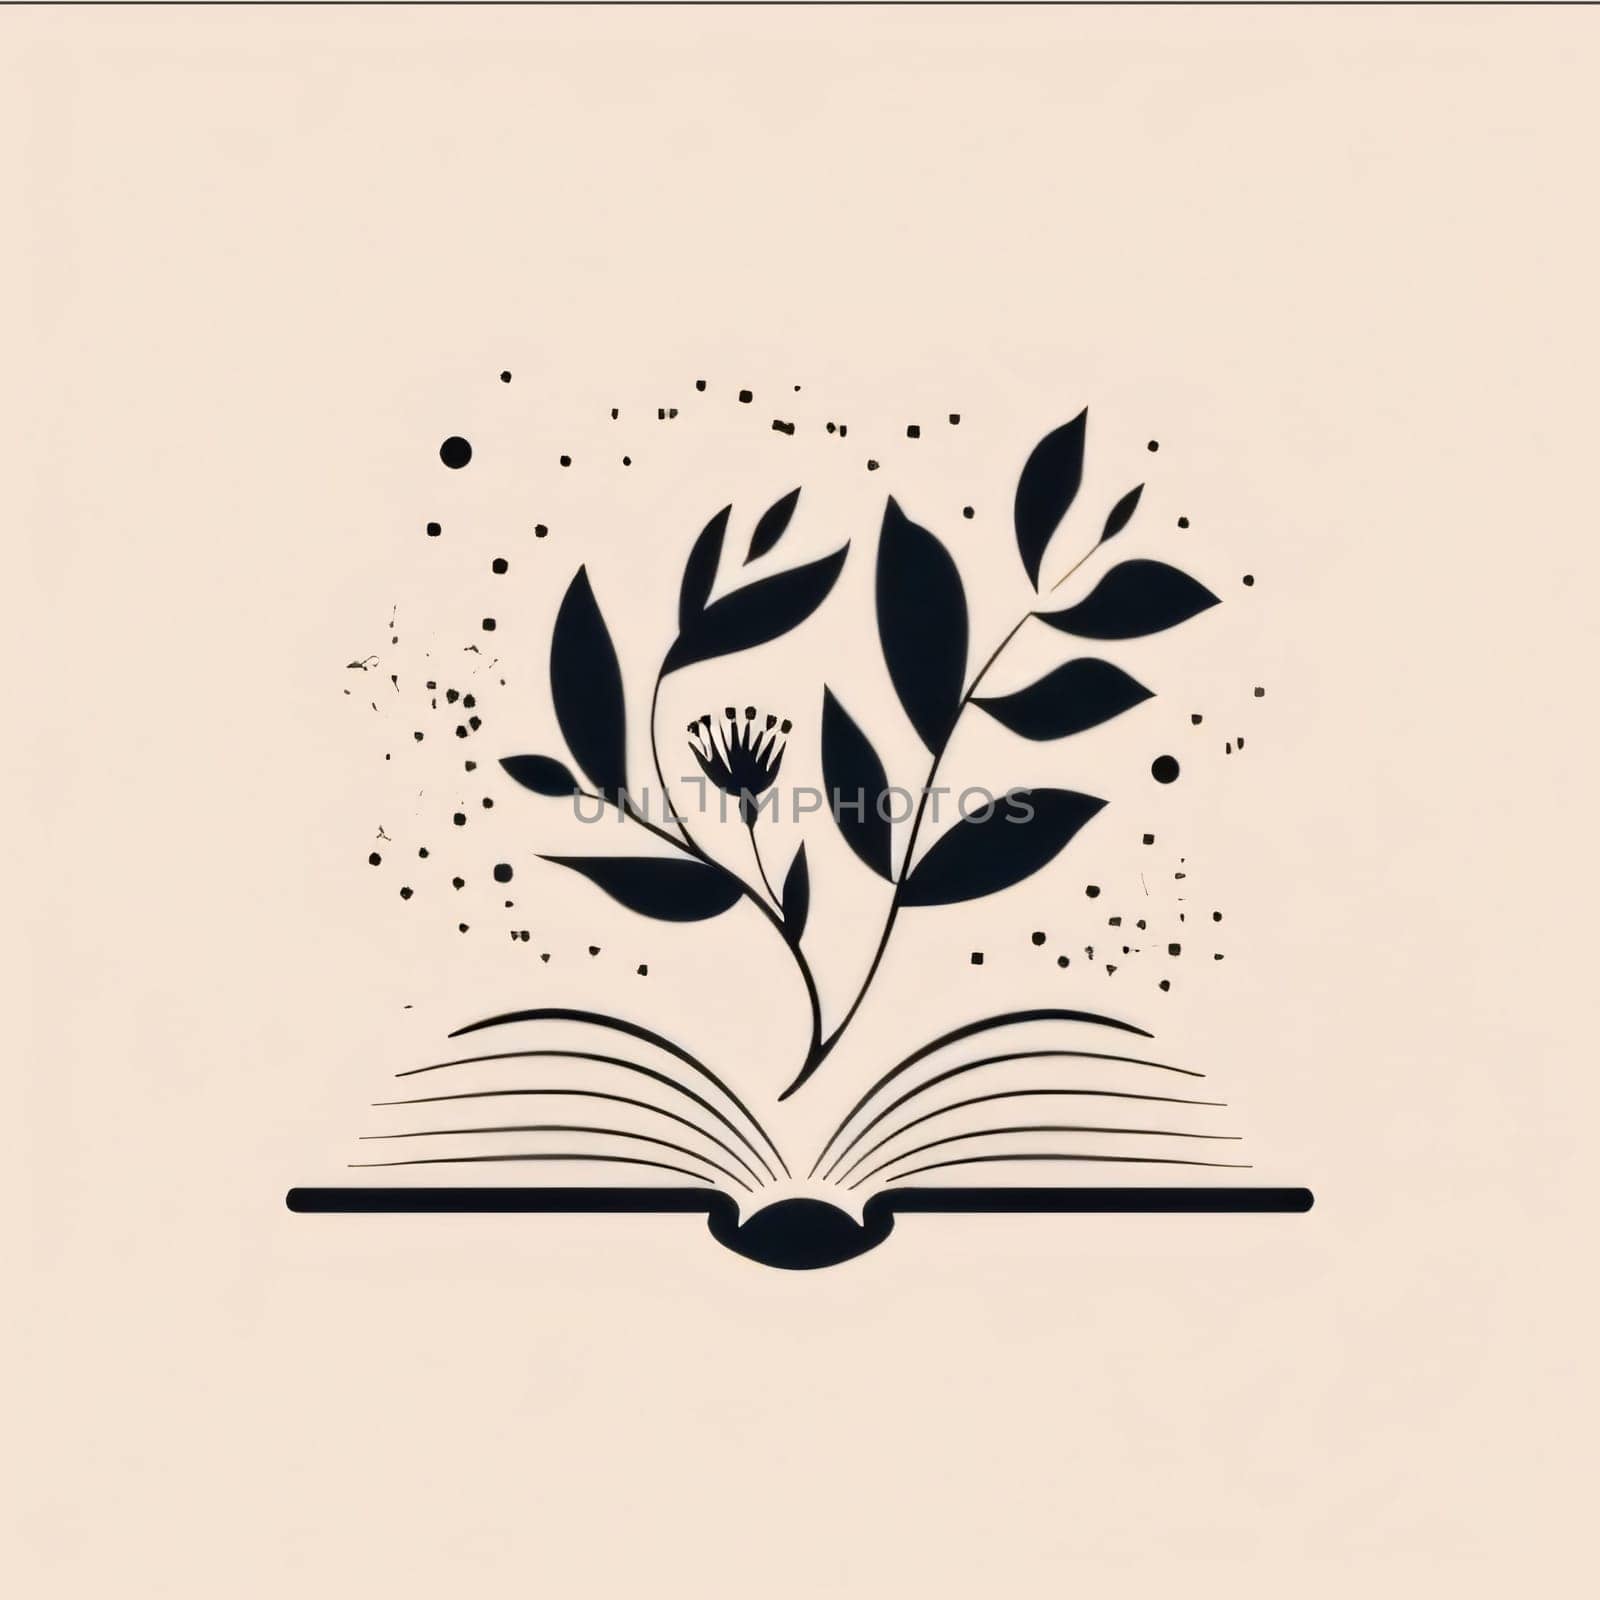 World Book Day: Open book with floral ornament. Vector illustration in black and white.